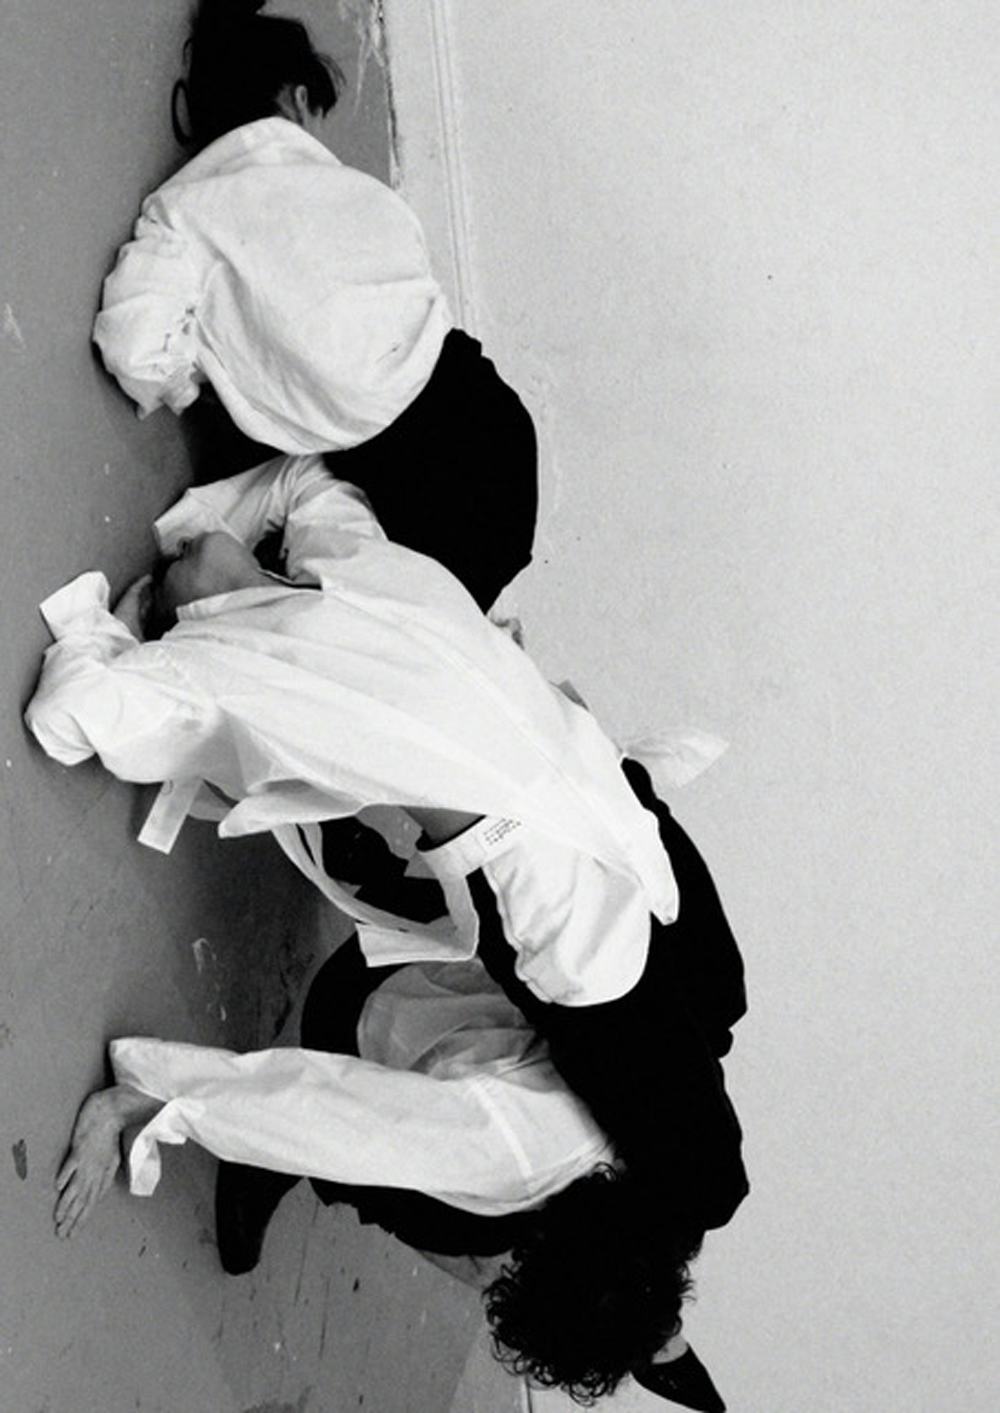 Black and white image of three people tumbling on top of each other